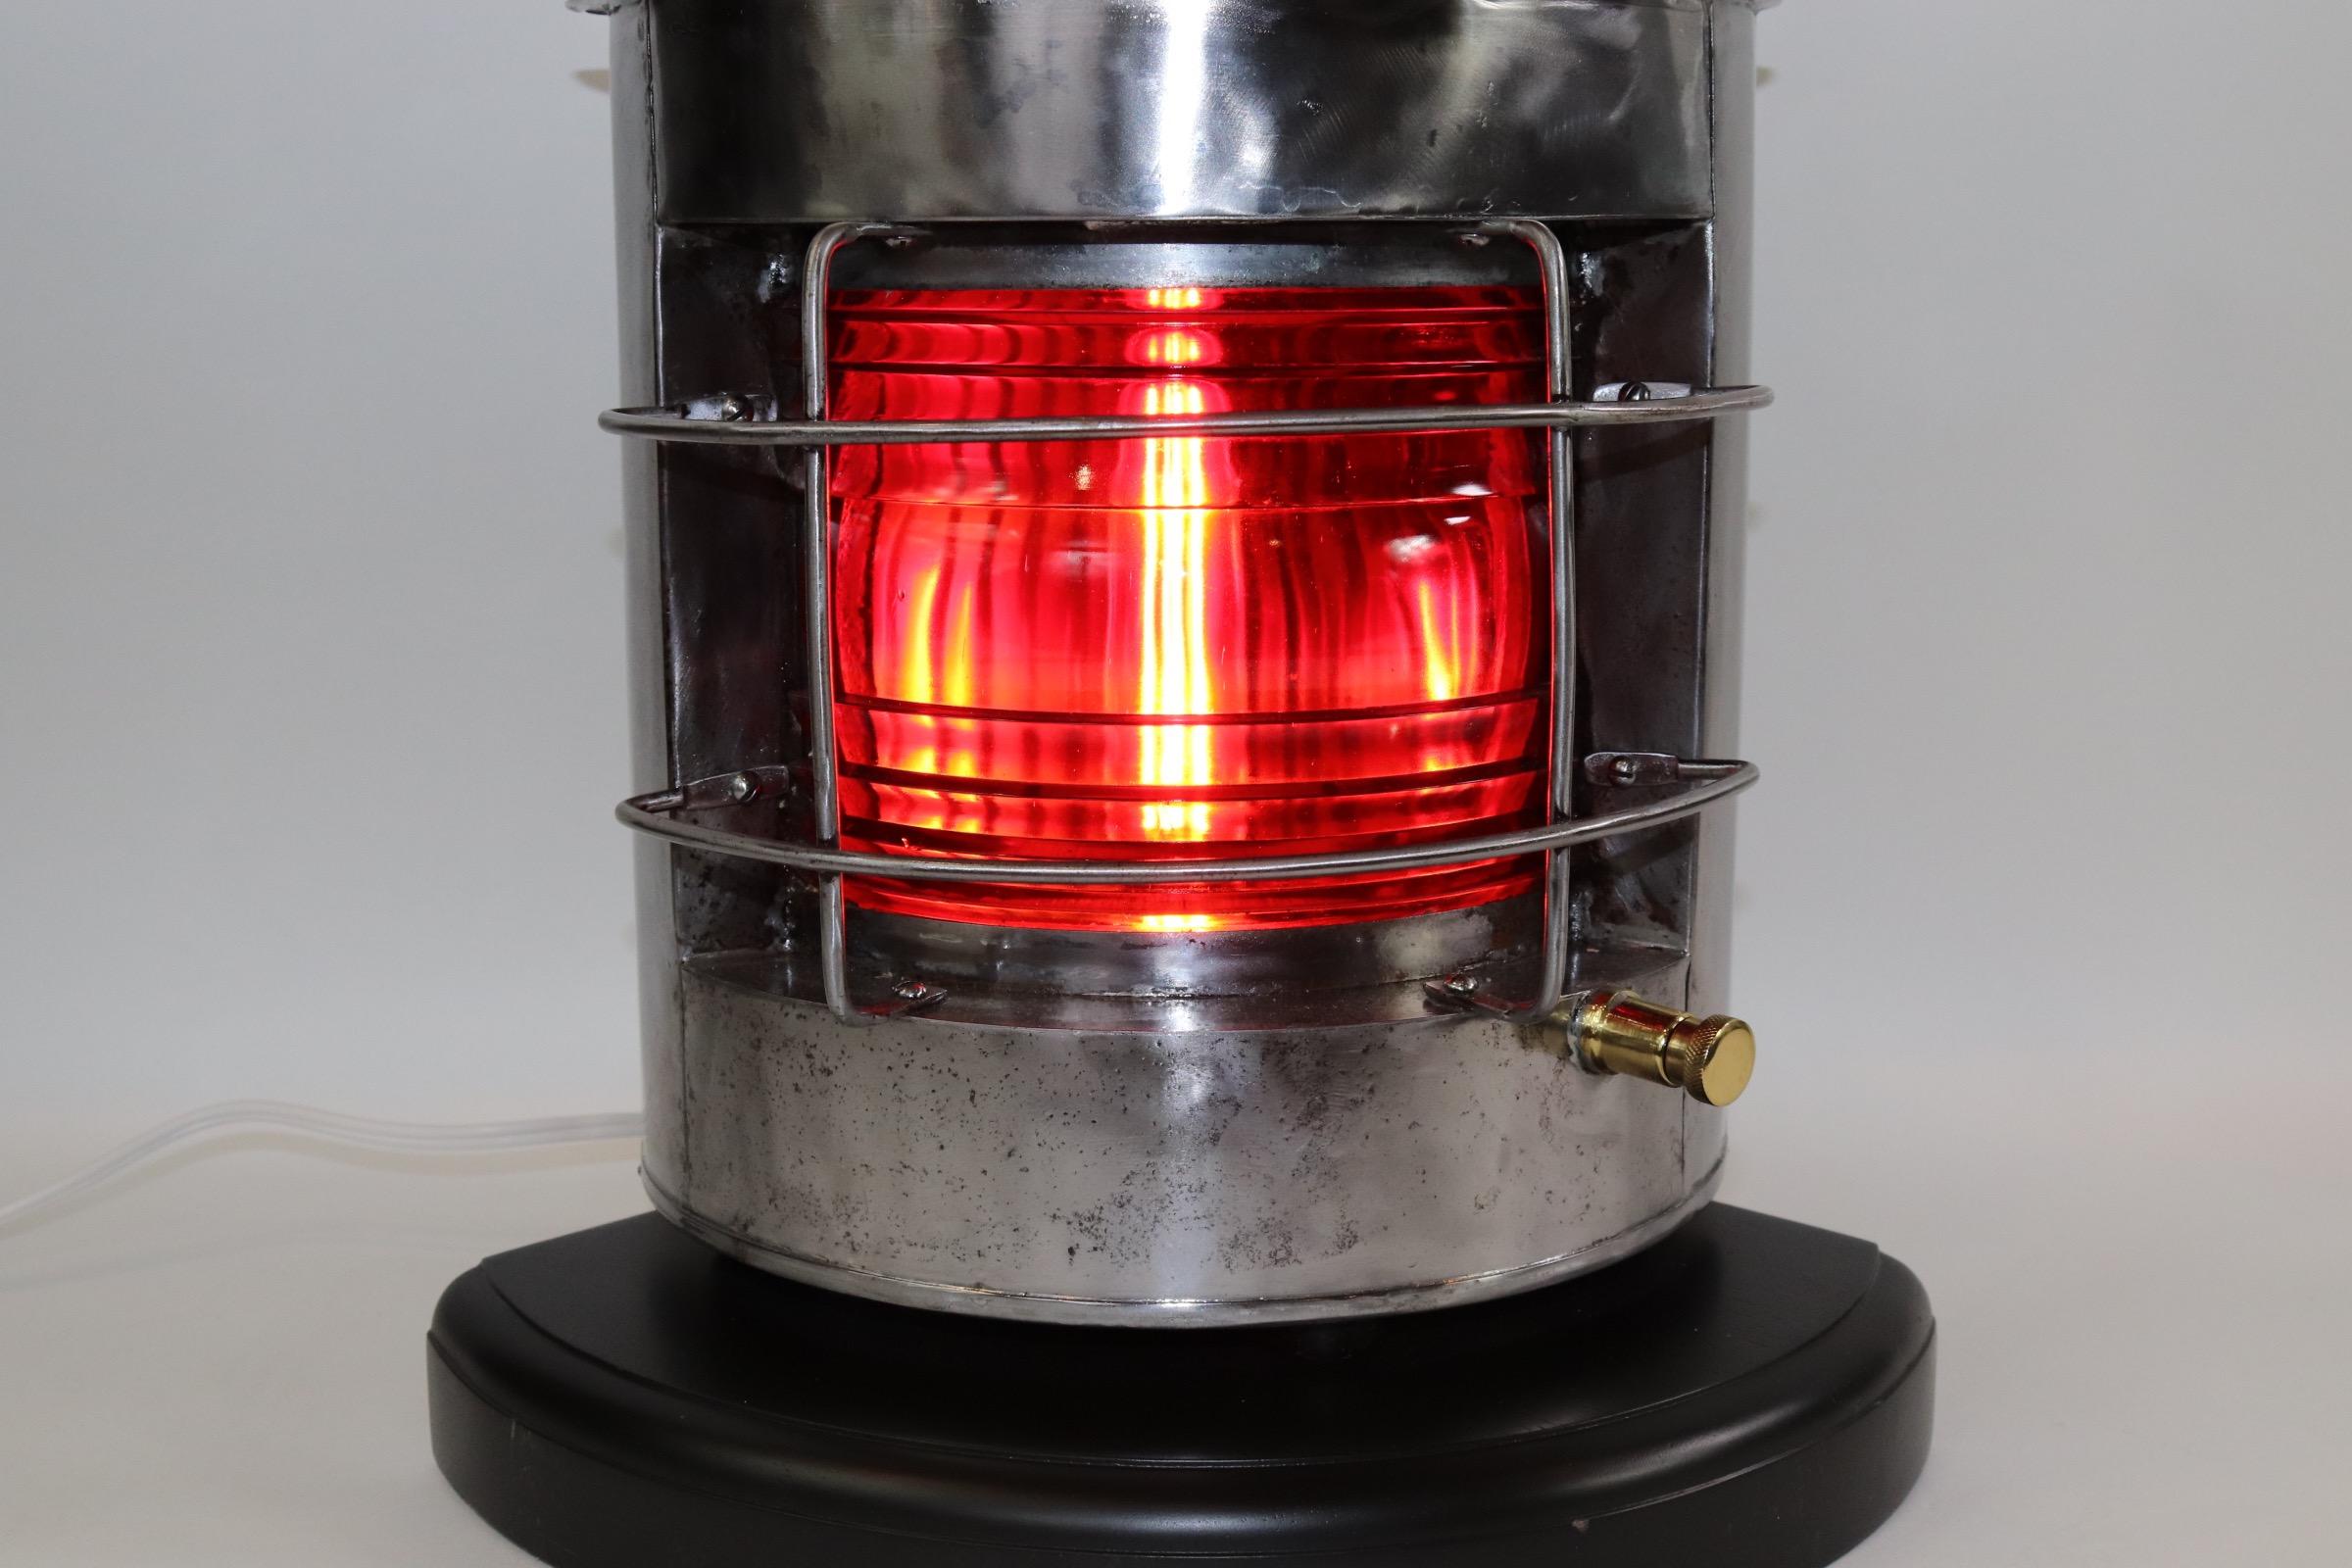 Polished steel ships port lantern with red Fresnel lens, protective cage, sturdy carry handle, mounted to a thick wood base with dark rich finish. Lantern is wired with new socket and wire for home display. Weight is 15 pounds.